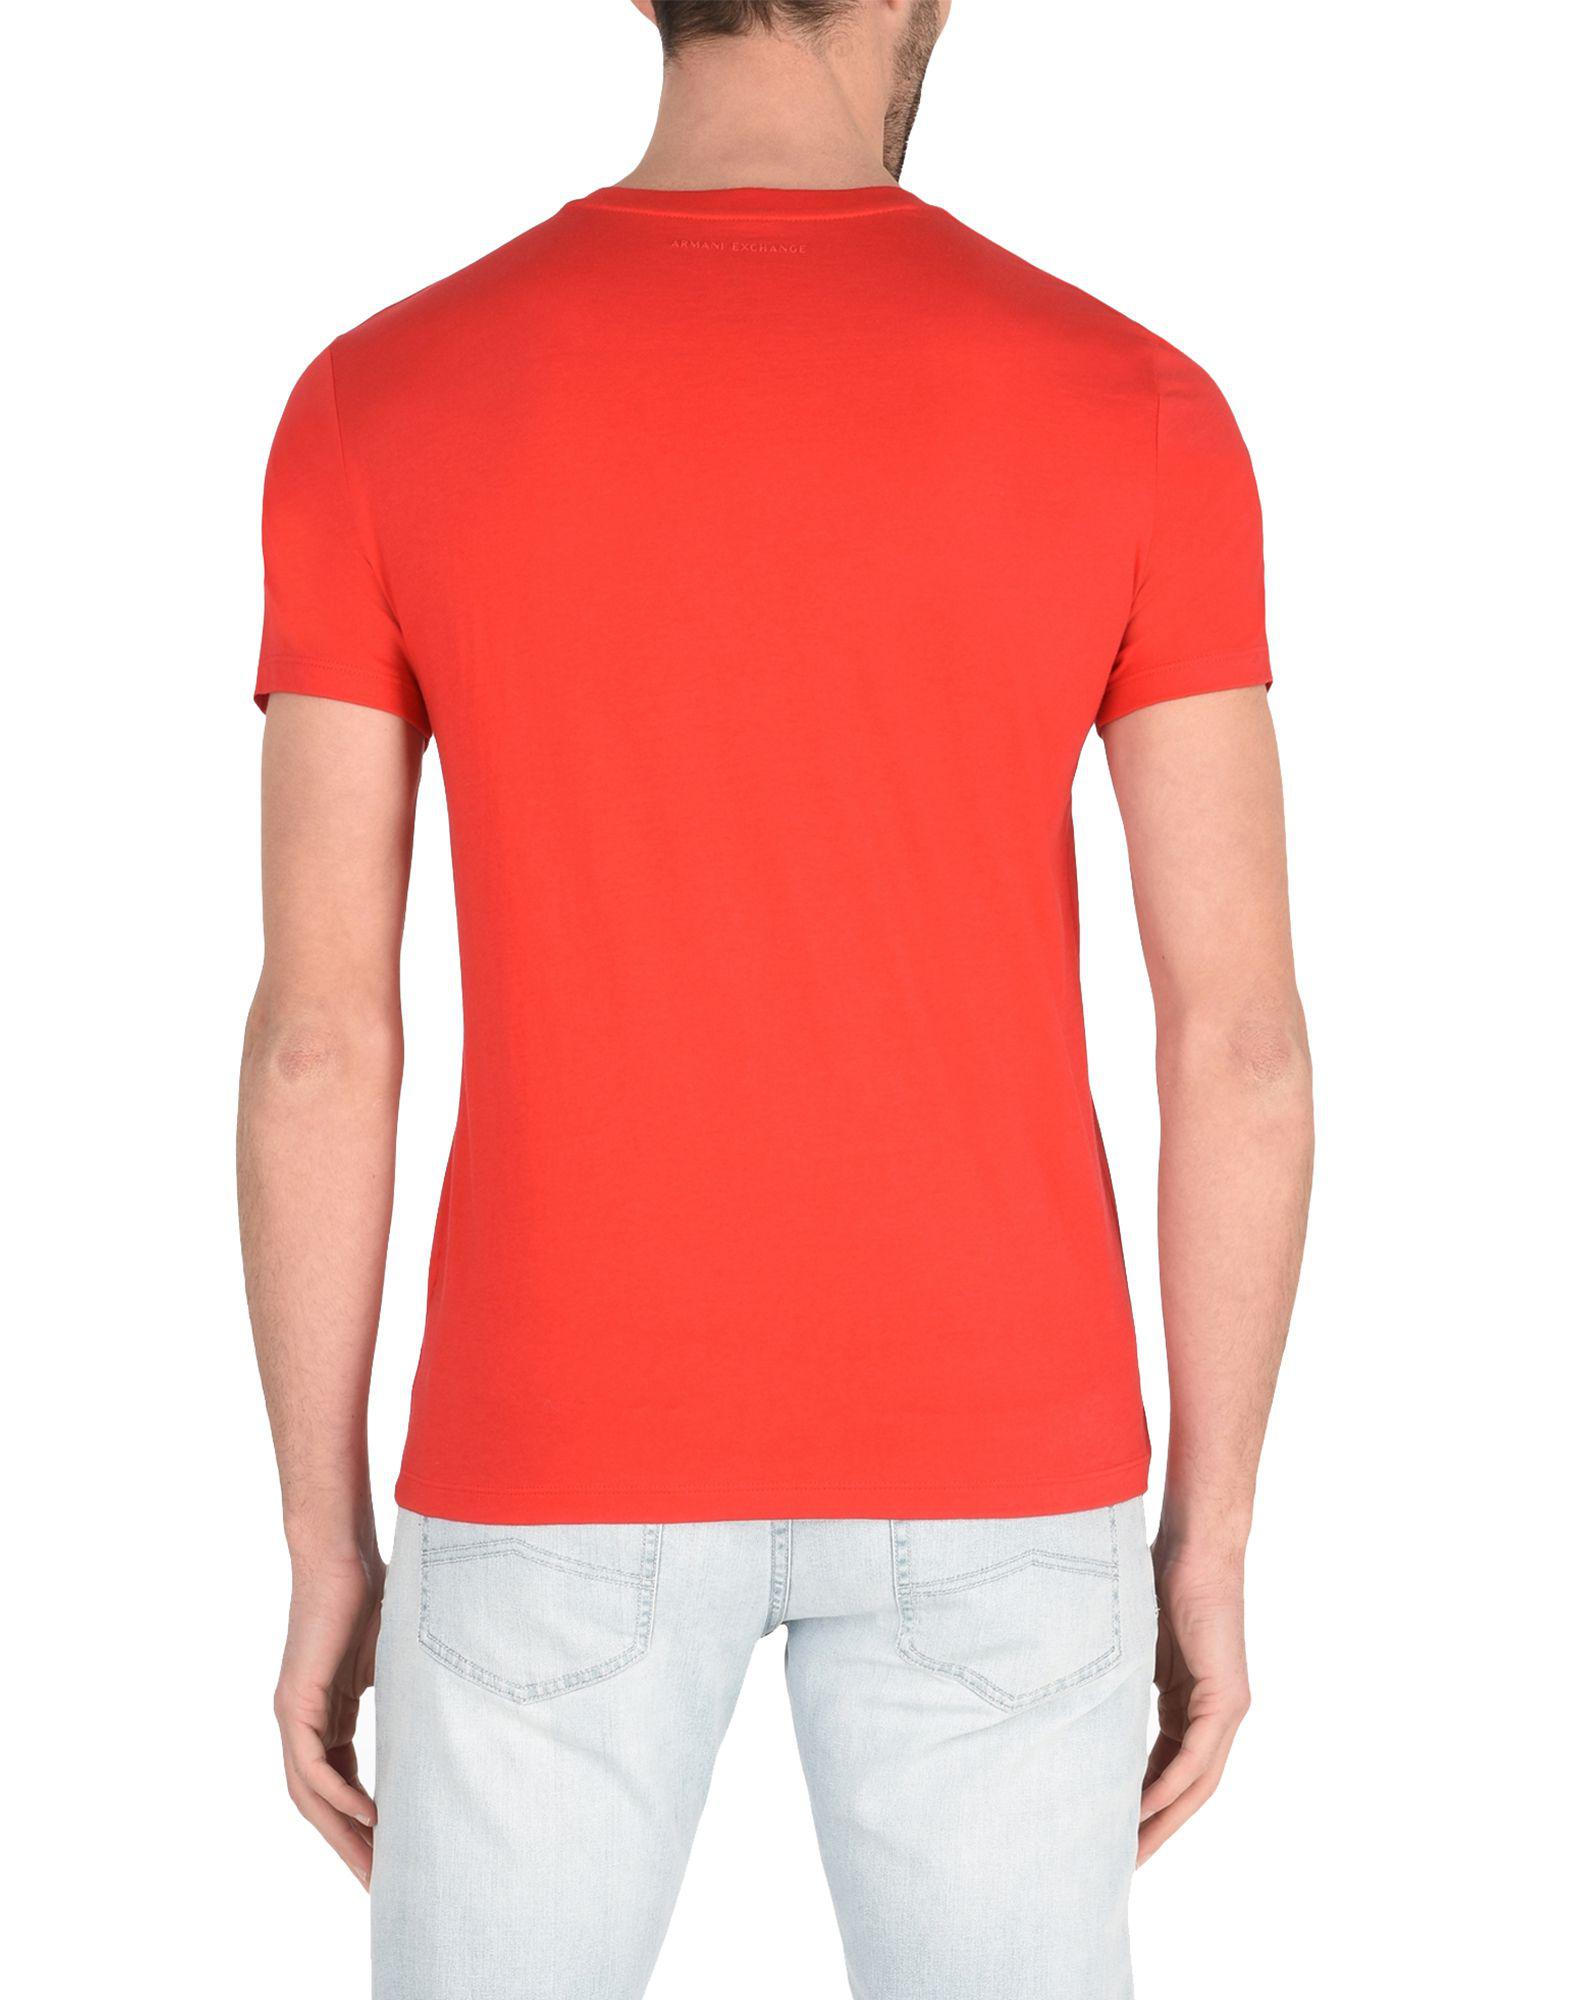 Armani Exchange Cotton T-shirt in Red for Men - Lyst